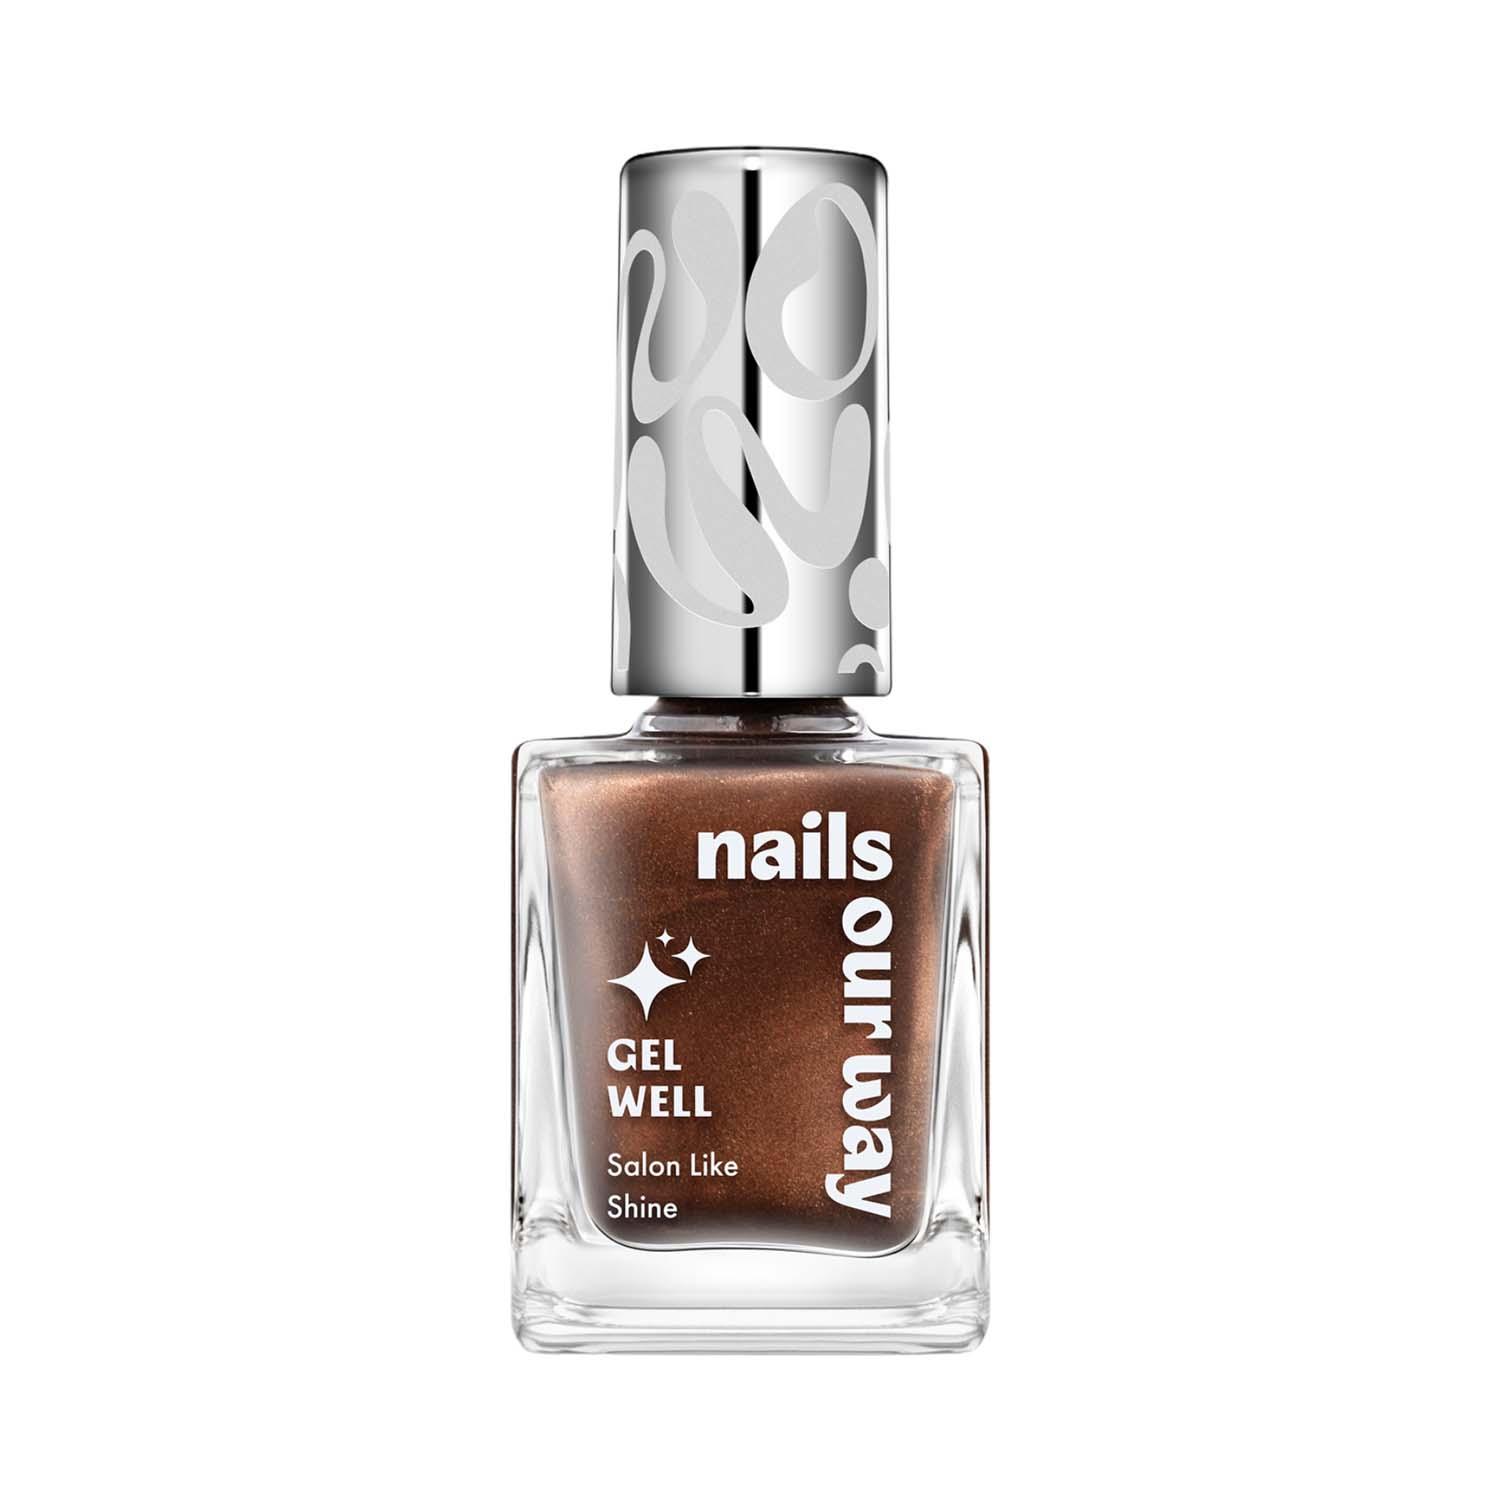 Nails Our Way Gel Well Nail Enamel - 504 Exuberant (10 ml)